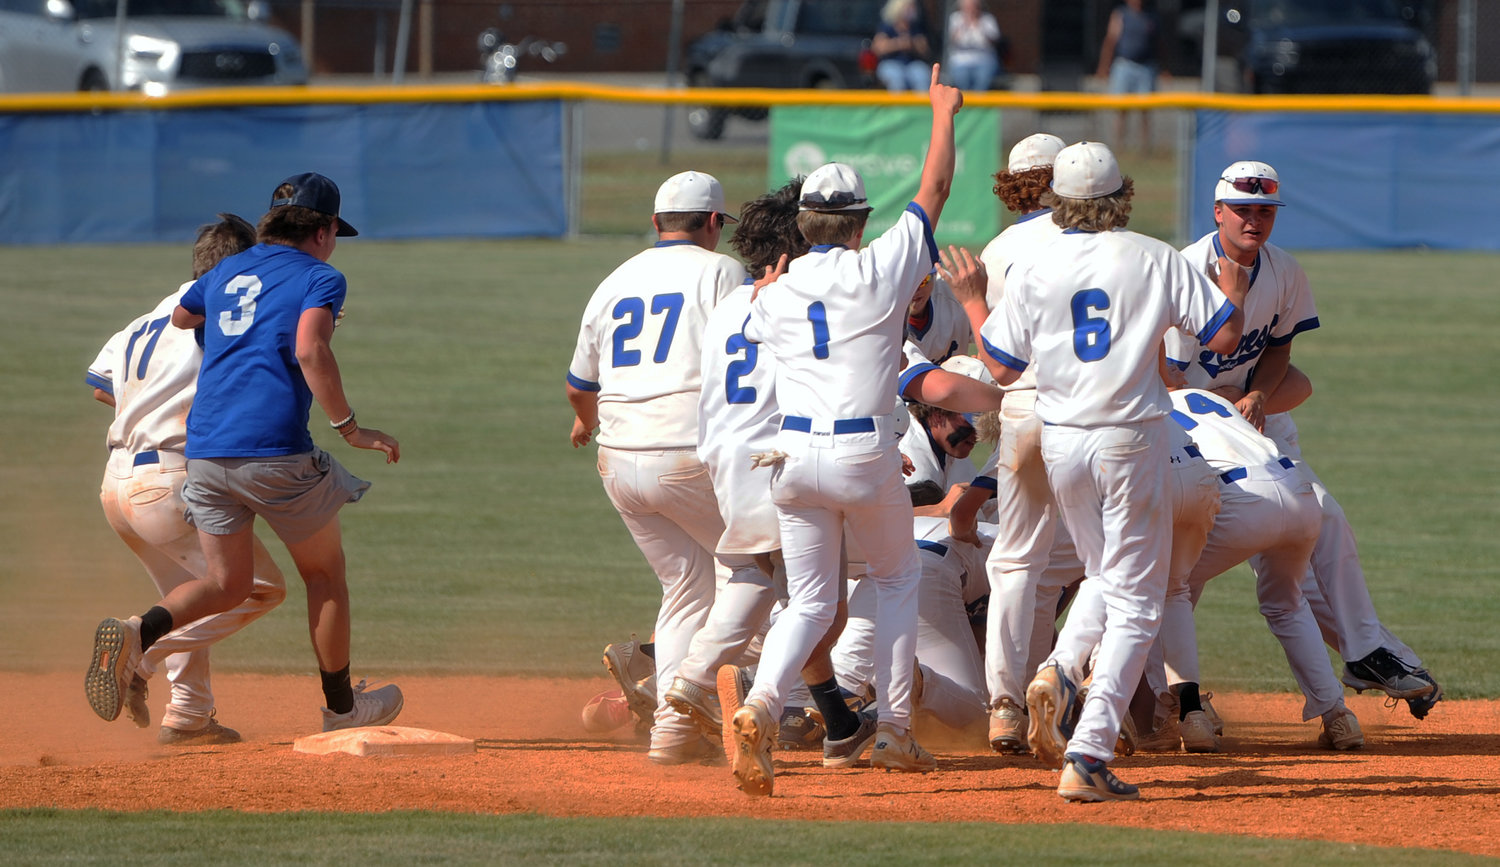 The Rockets dogpile on Preston Gentry, who singled home the game-winning run in the bottom of the eighth inning.